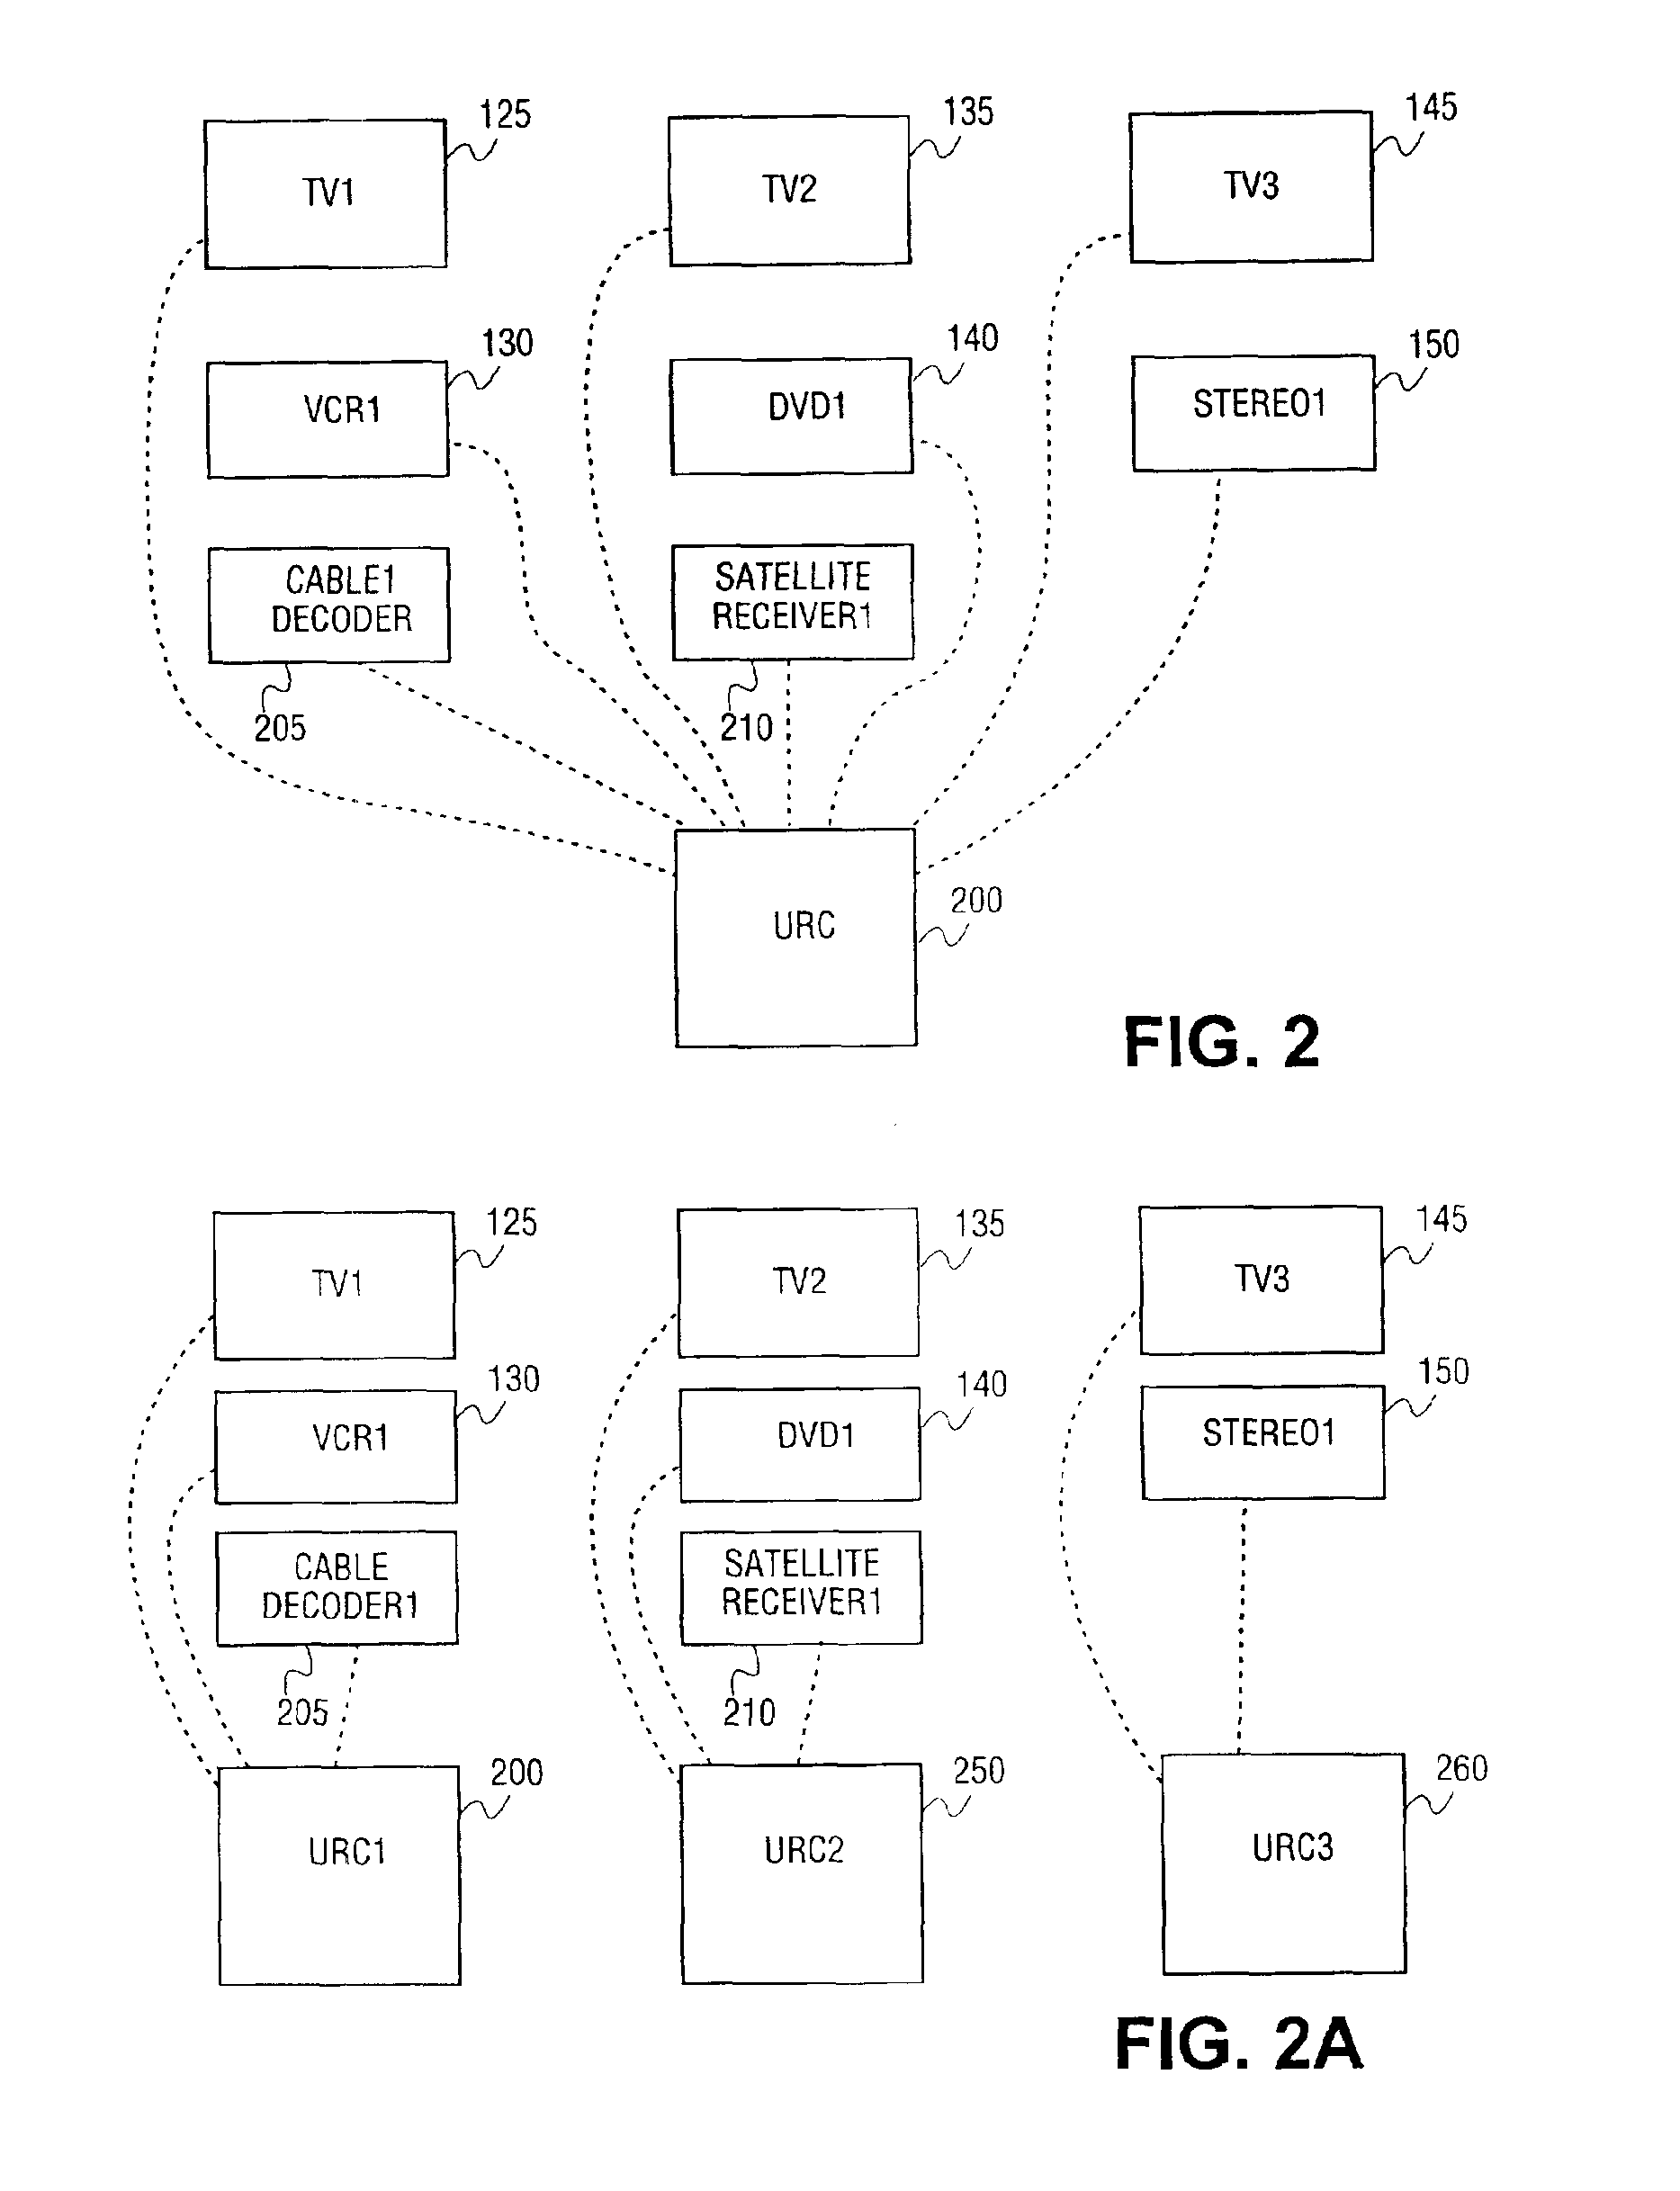 Method and apparatus to locate a device in a dwelling or other enclosed space